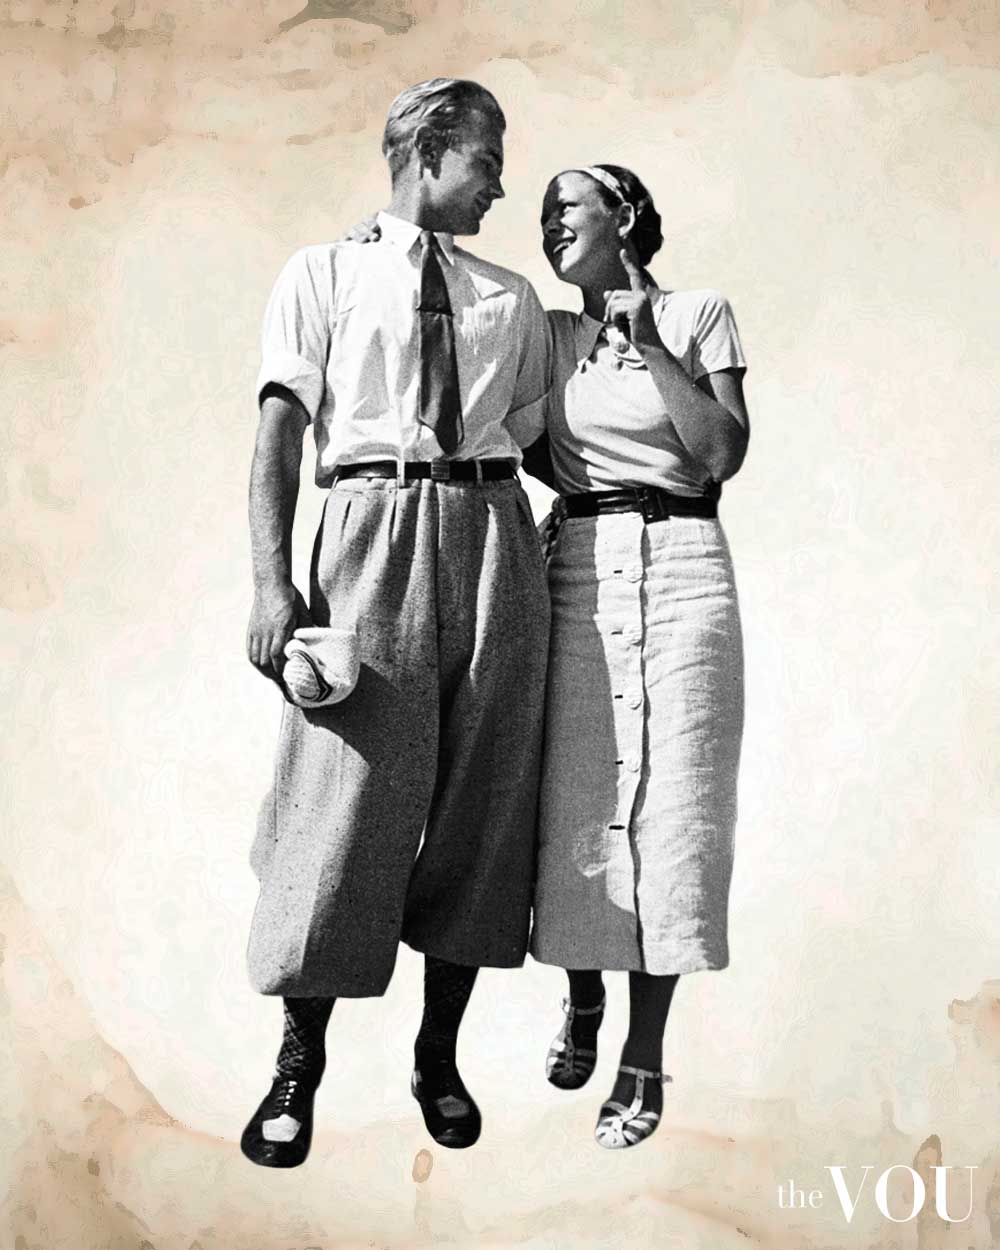 1920s Fashion Plus-fours Pants With High Socks